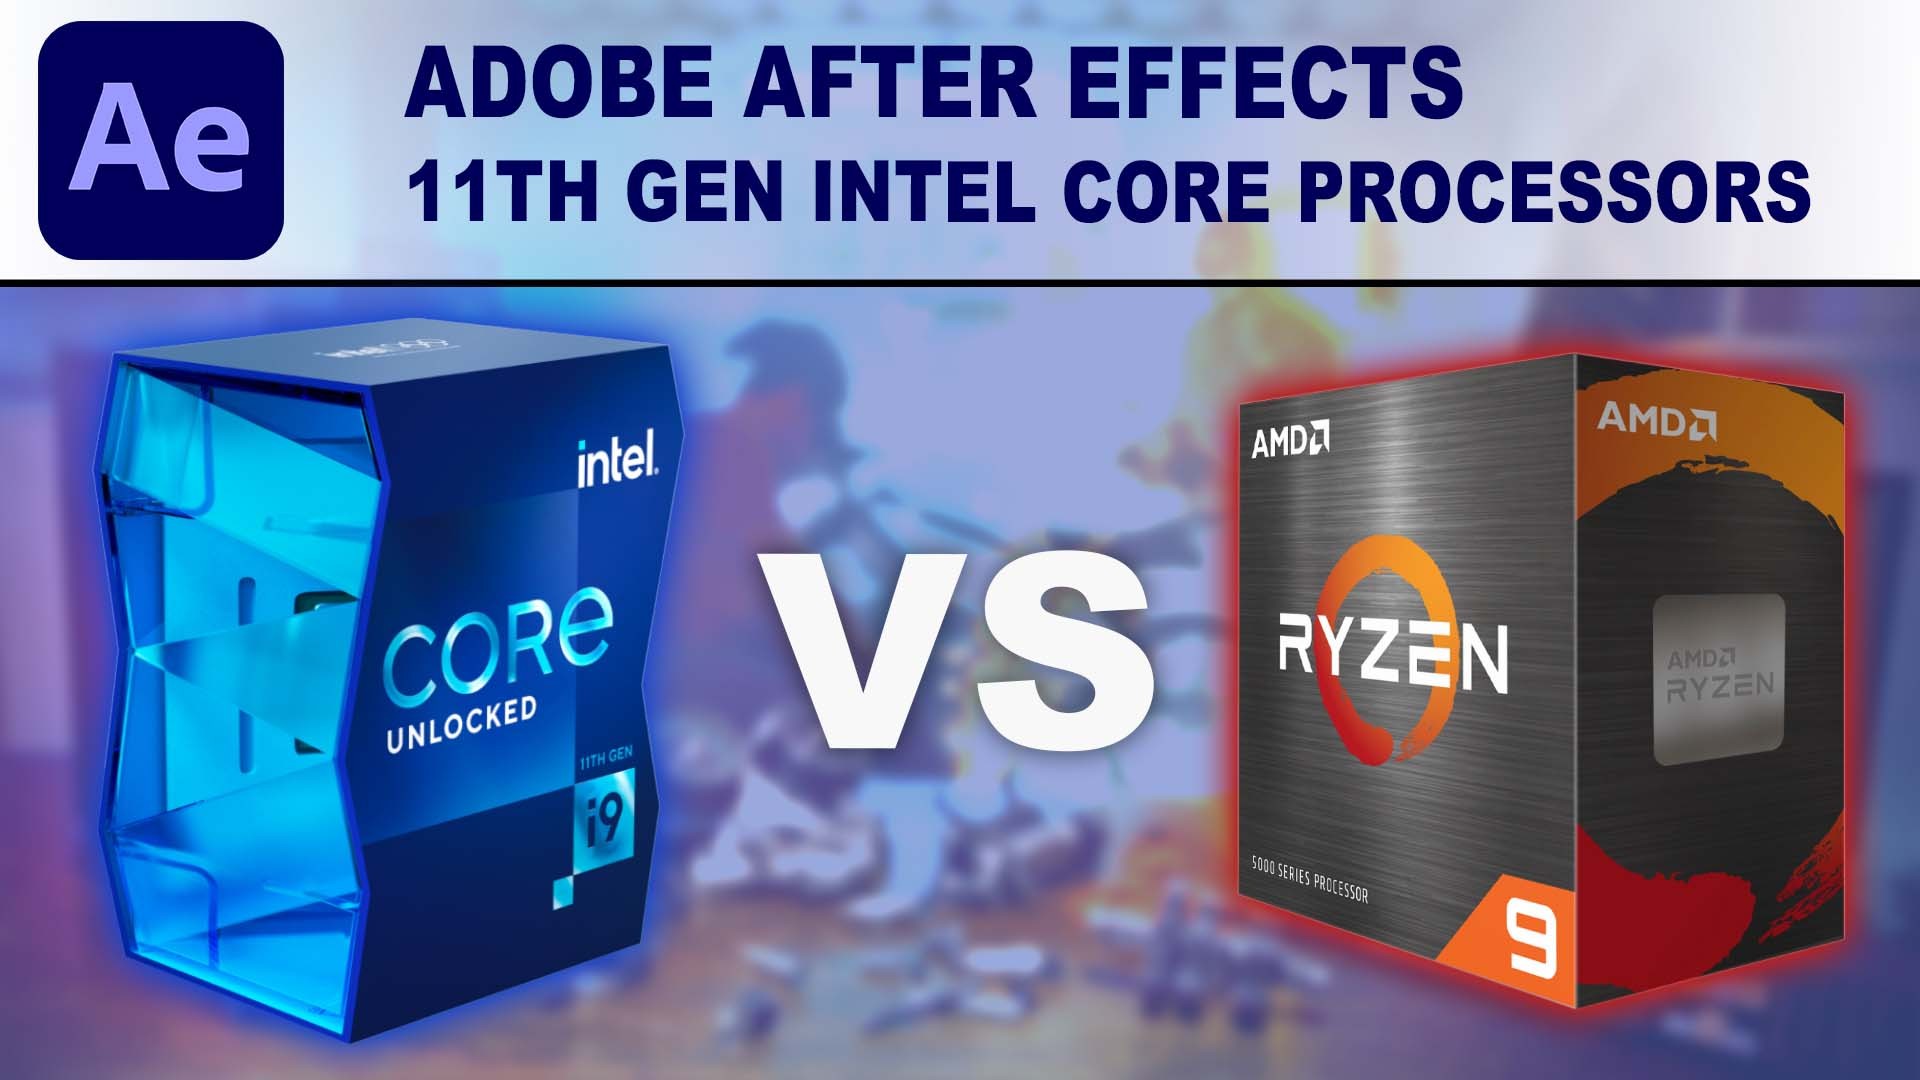 11th Gen Intel Core Processors for Adobe After Effects